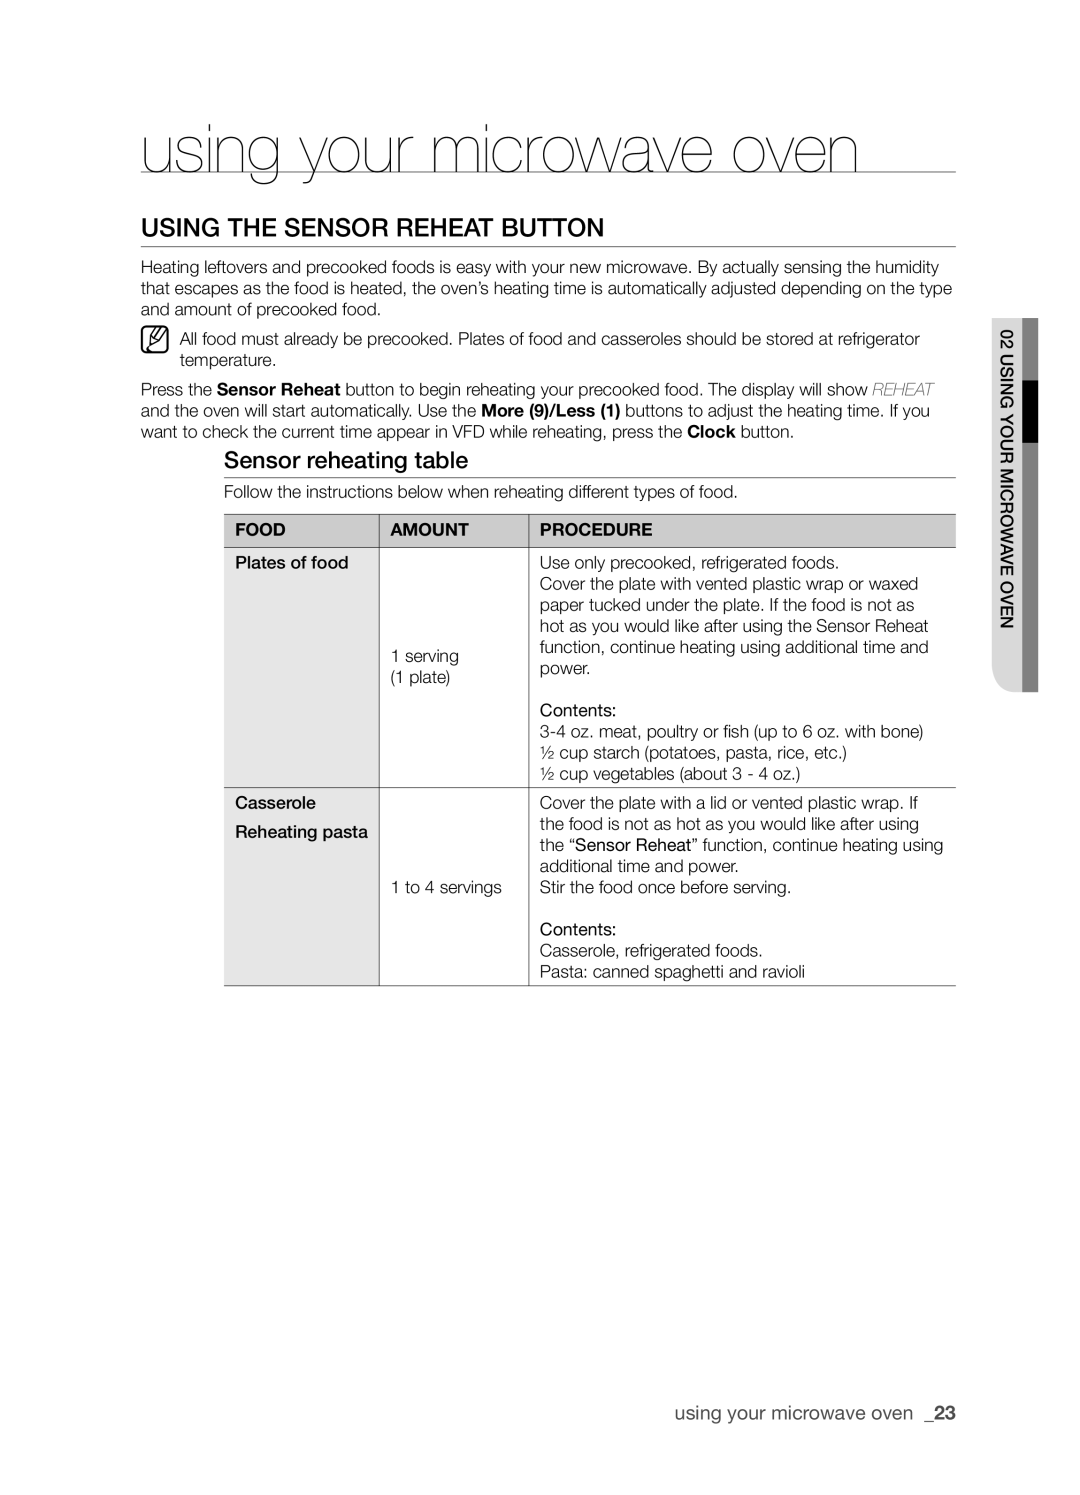 Samsung SMH8165STG user manual Using the Sensor Reheat button, using your microwave oven, Food, Amount, Procedure 